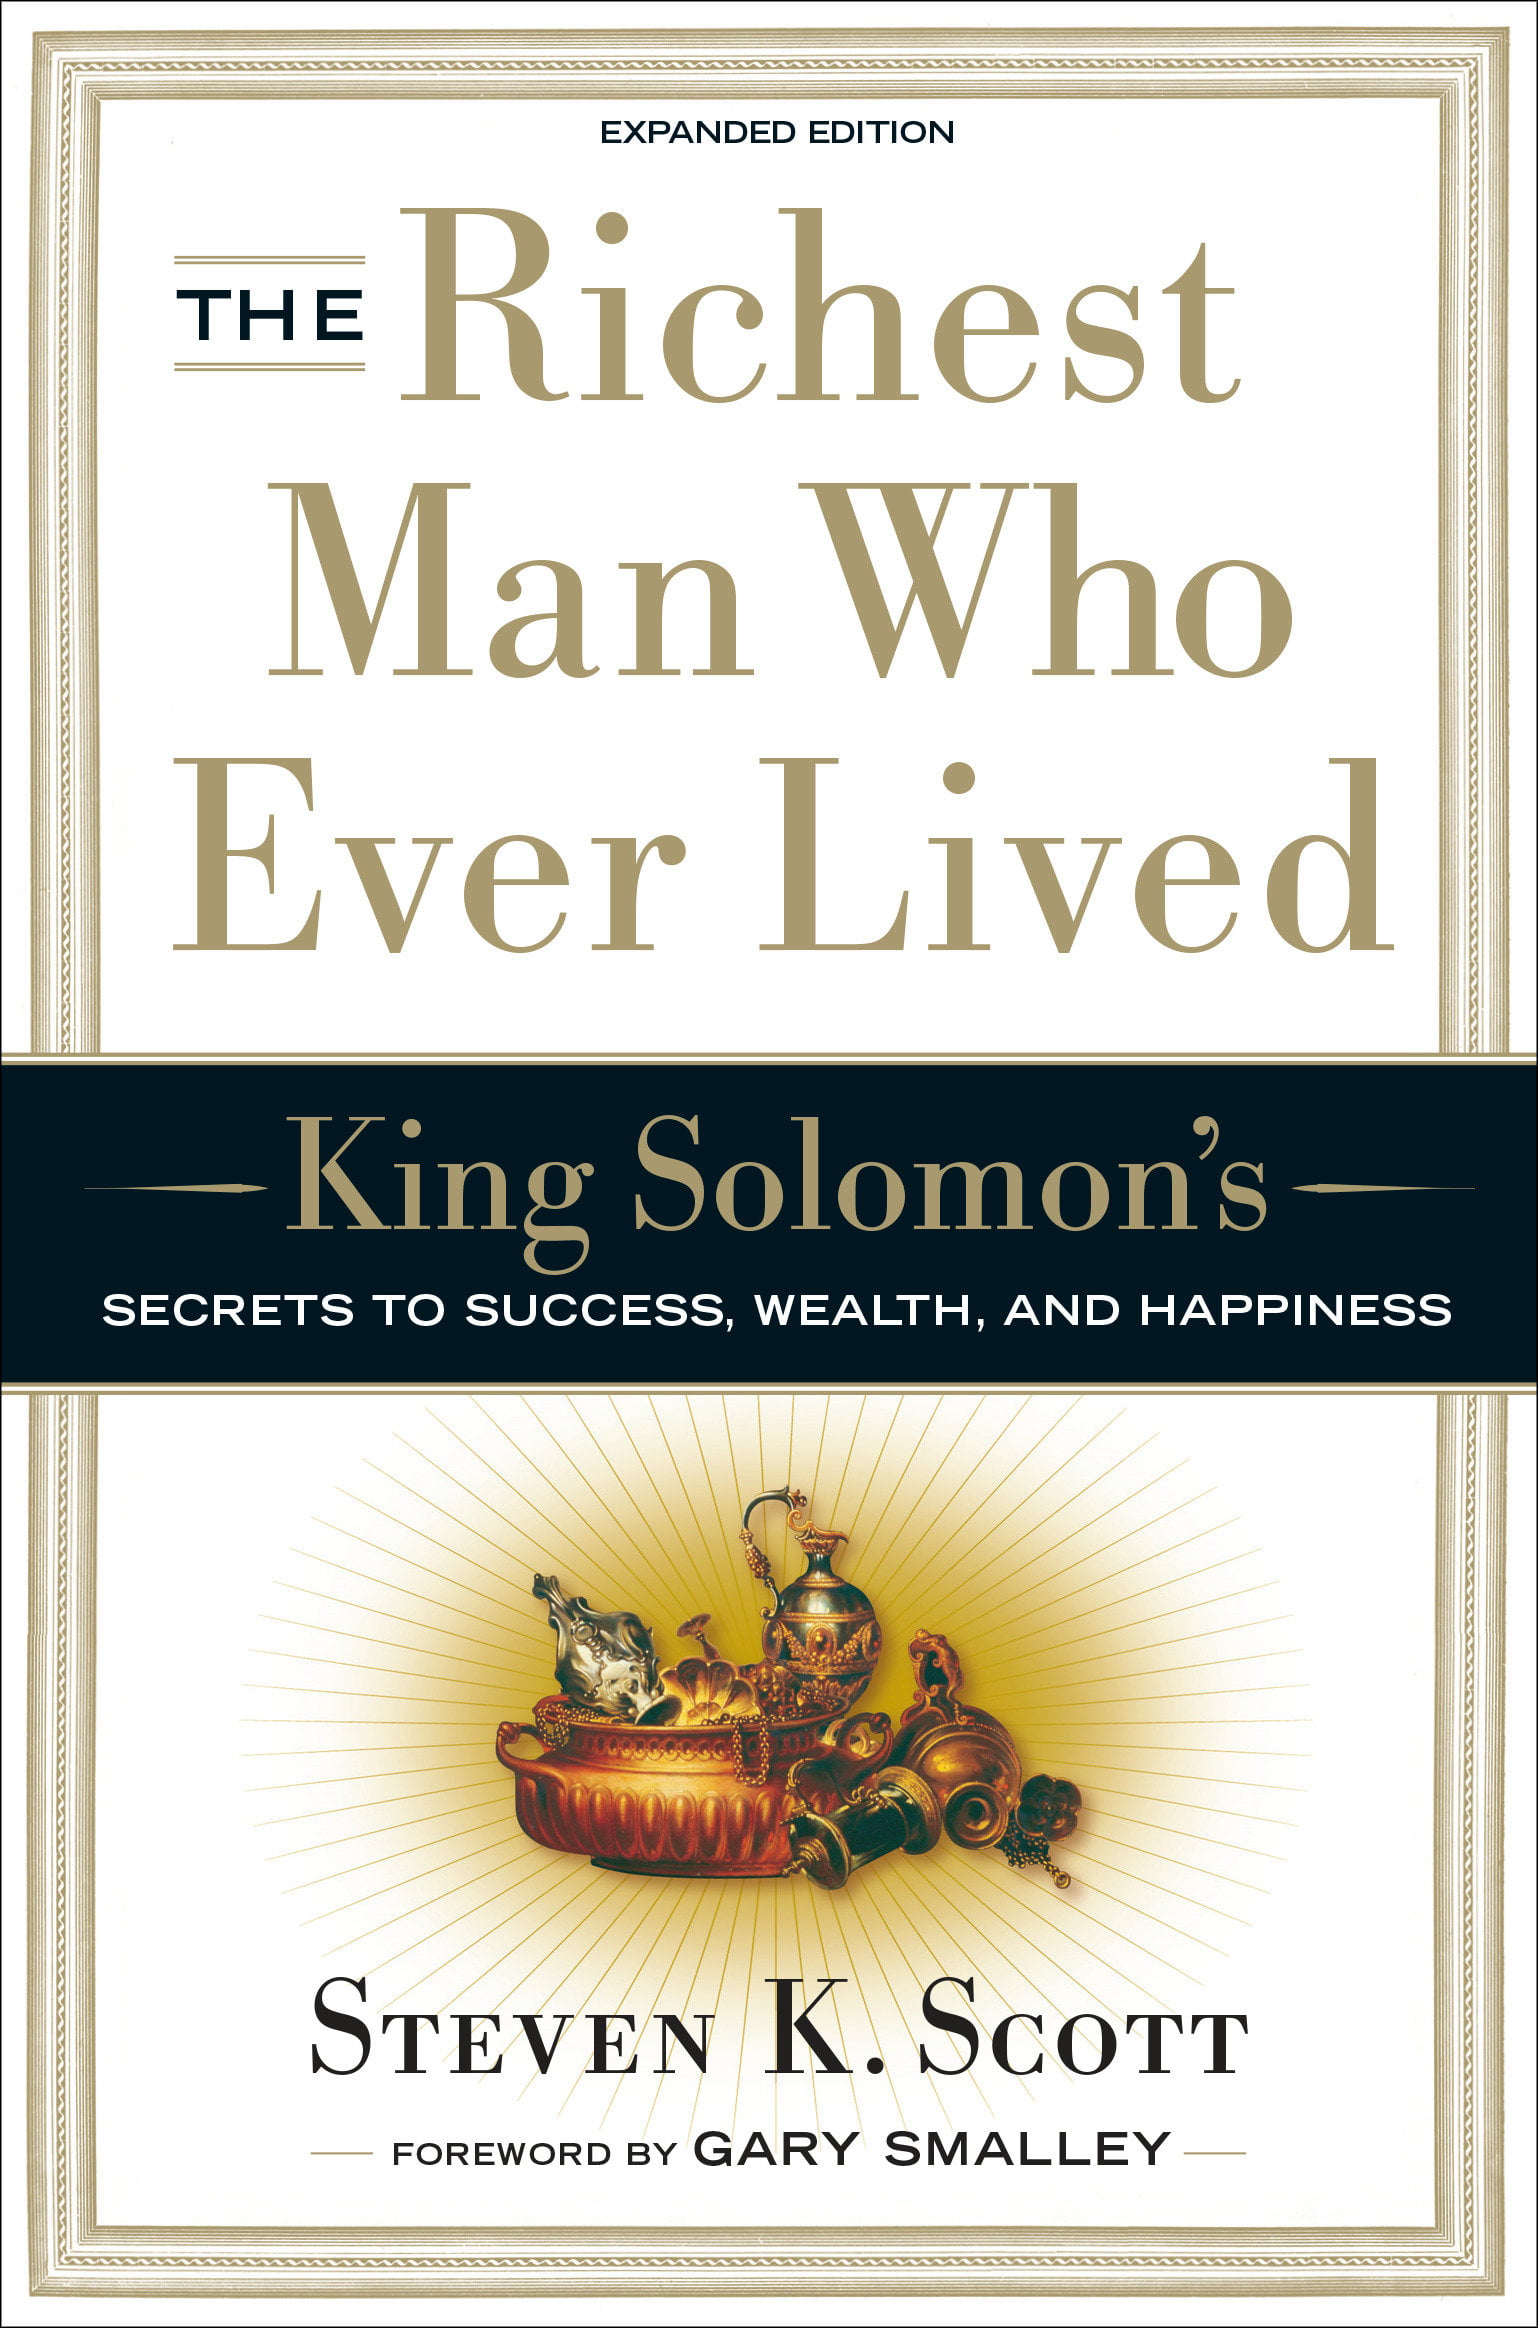 The-Richest-Man-Who-Ever-Lived-King-Solomons-Secrets-to-Success-Wealth-and-Happiness